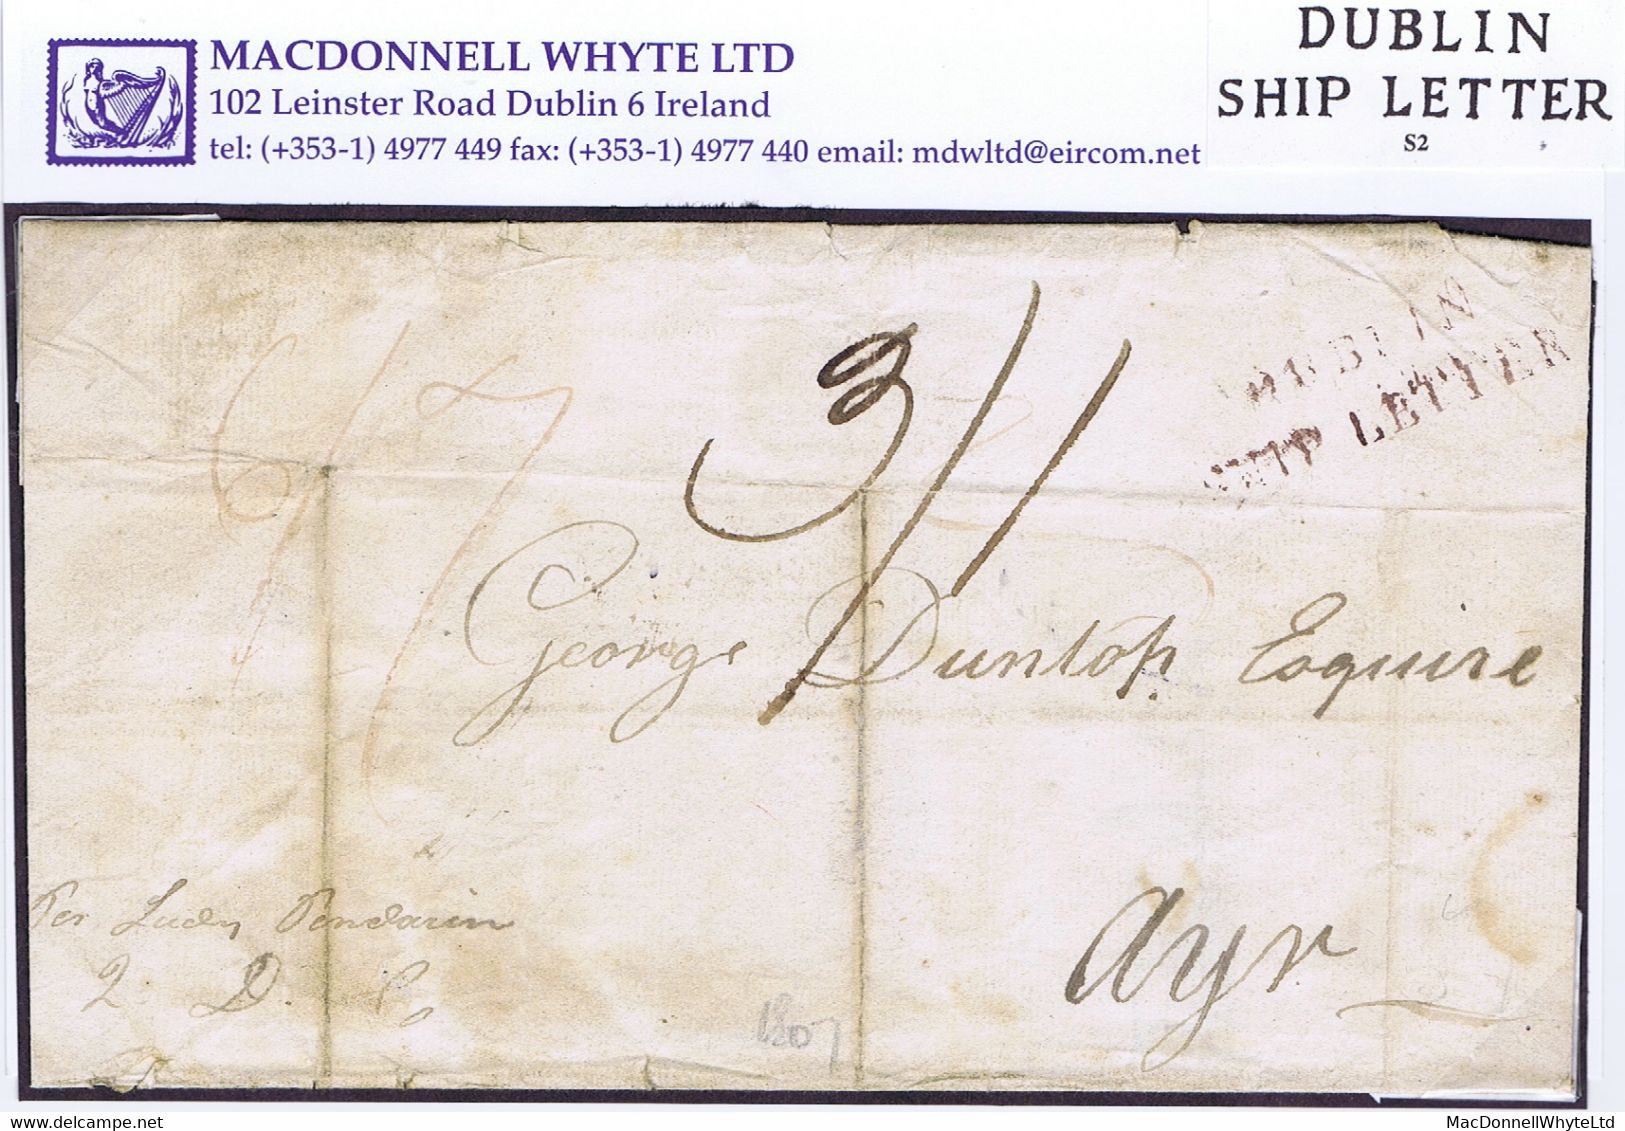 Ireland Maritime Dublin 1807 Cover To Ayr By Private Ship "Lady Pendarin" With 2-line DUBLIN/SHIP LETTER In Claret - Prefilatelia